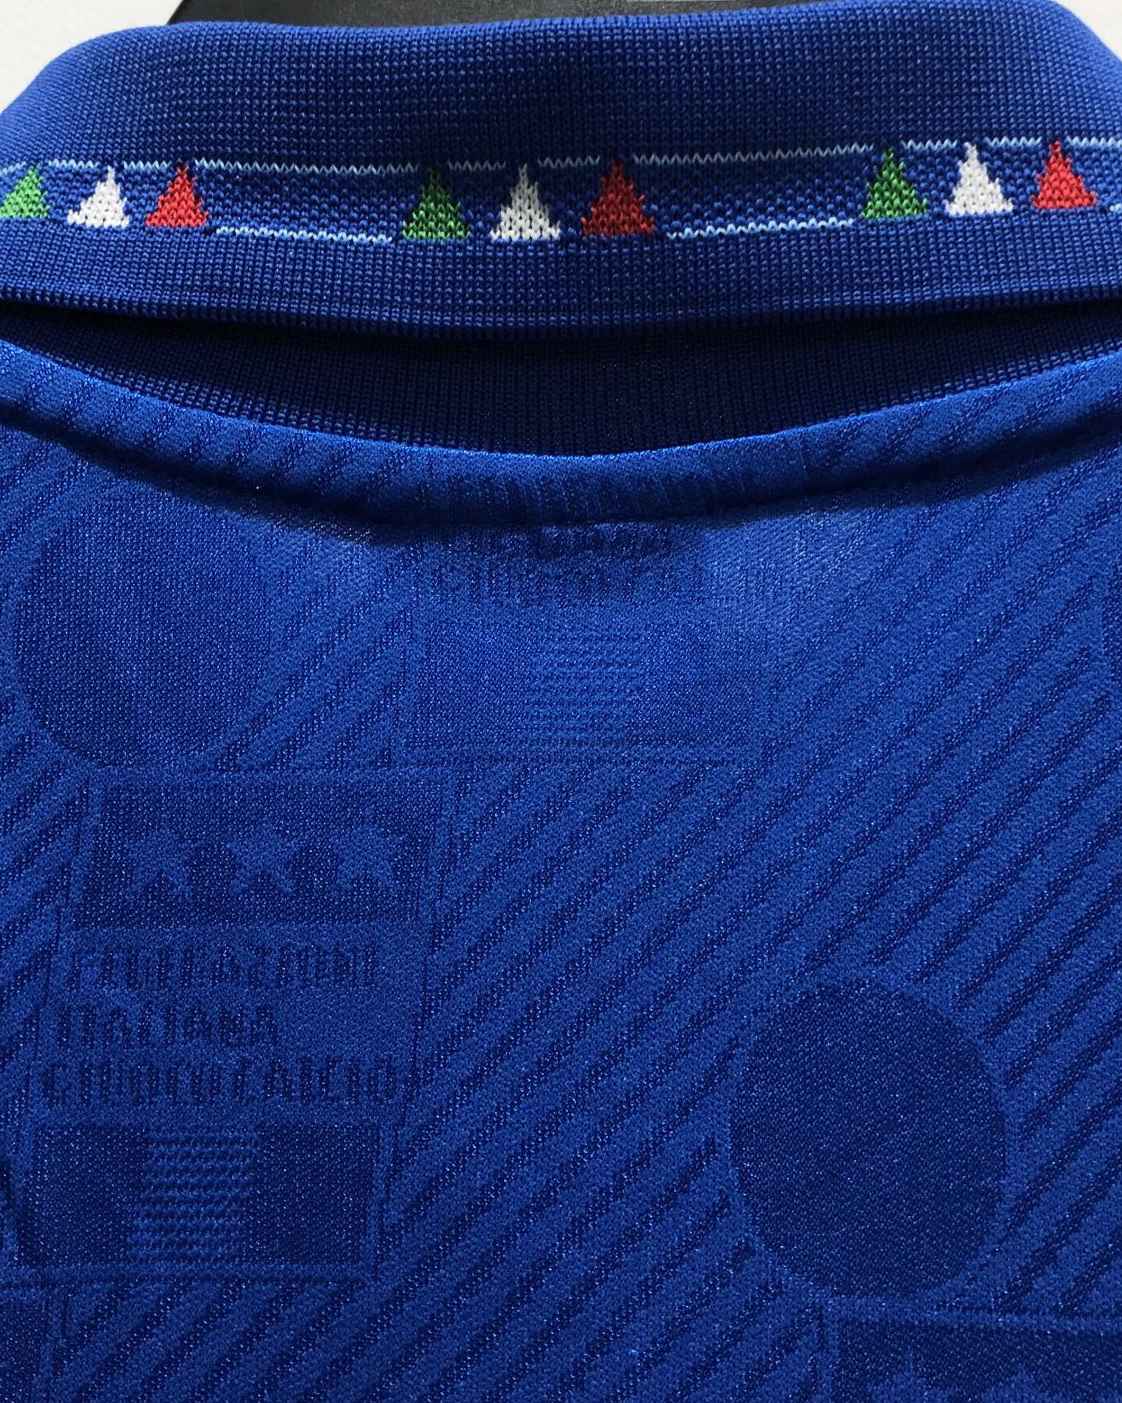 Italy 1994 Home Soccer Jersey